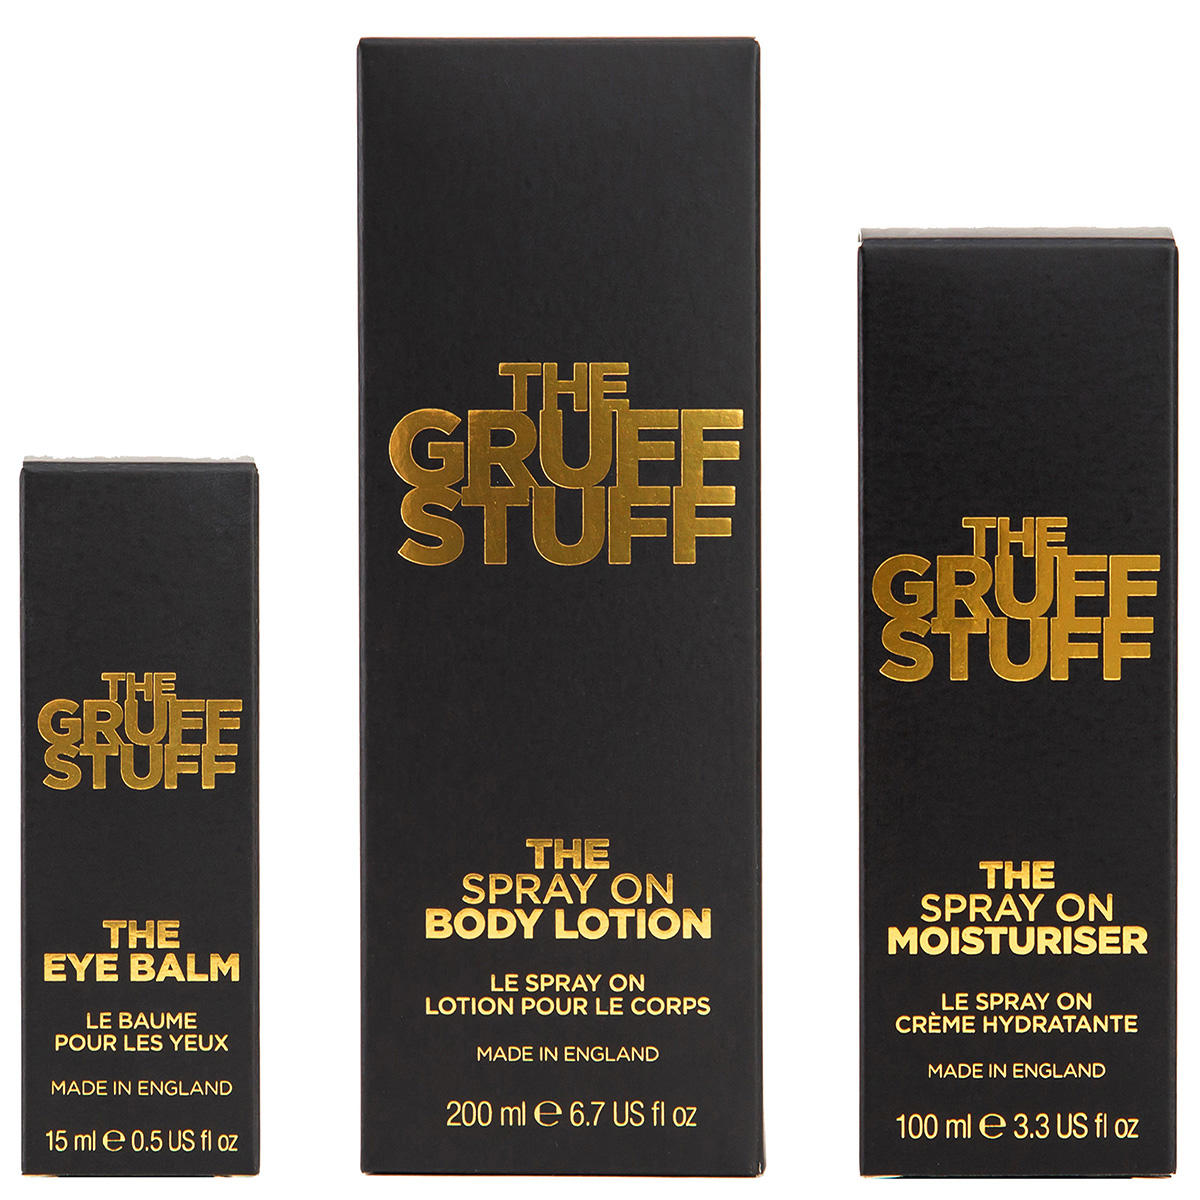 The Gruff Stuff The All-In-1 Set  - 2